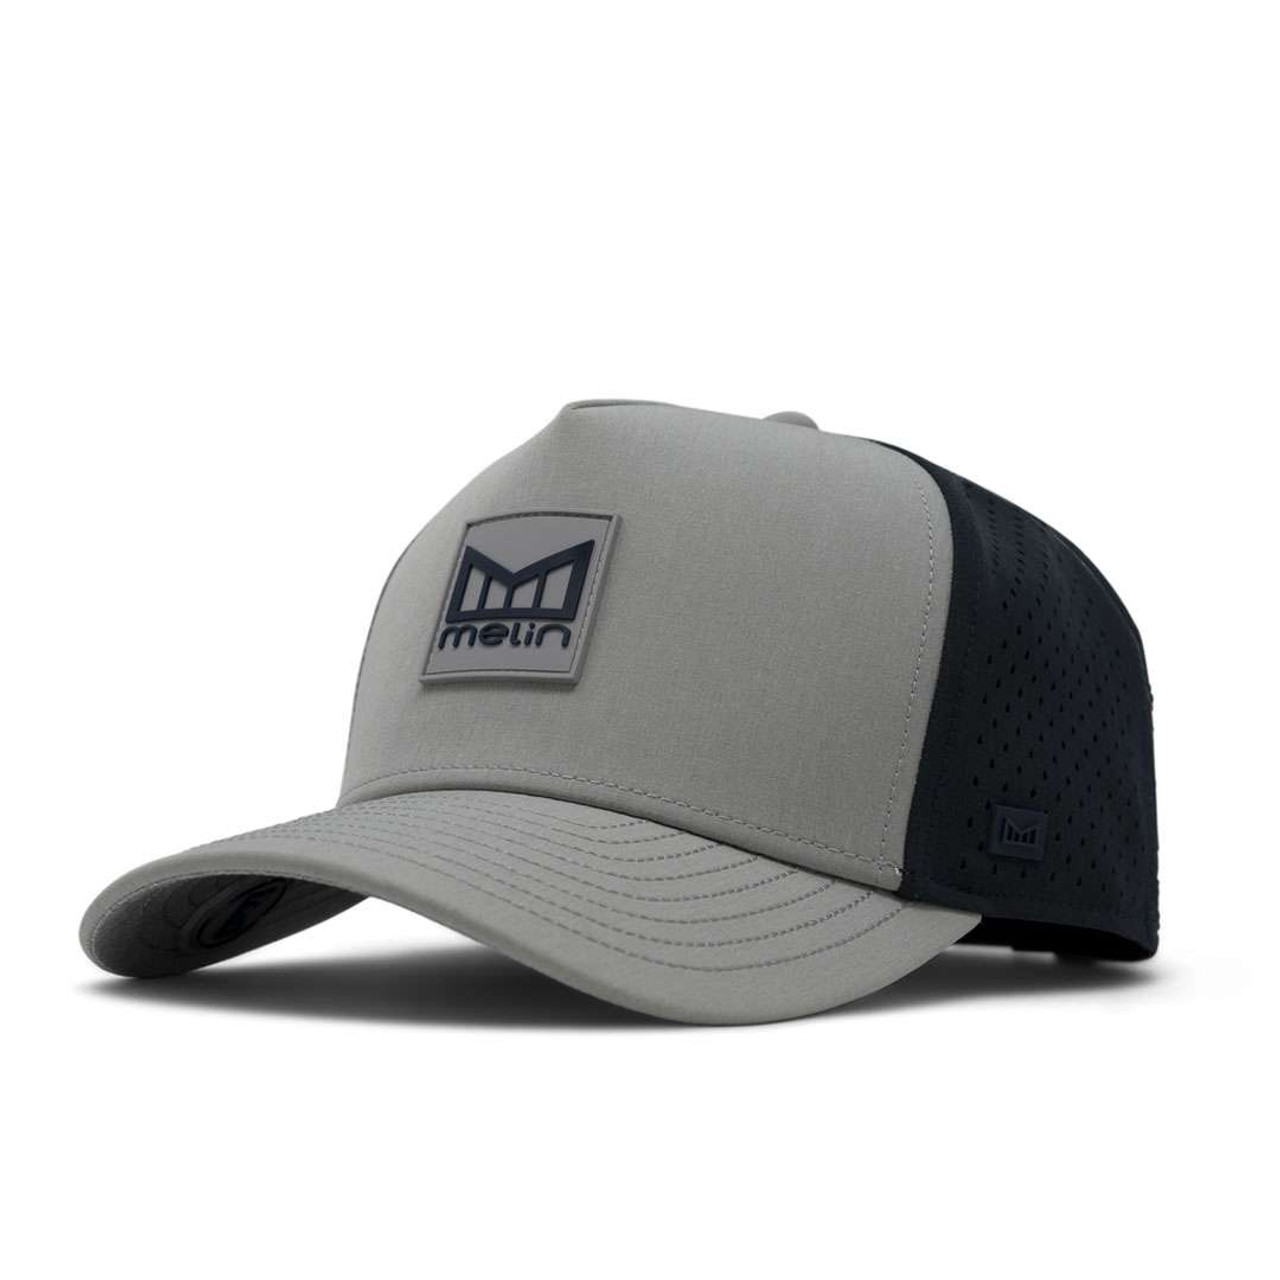 Melin A-Game Hydro Hat - Navy - TYLER'S